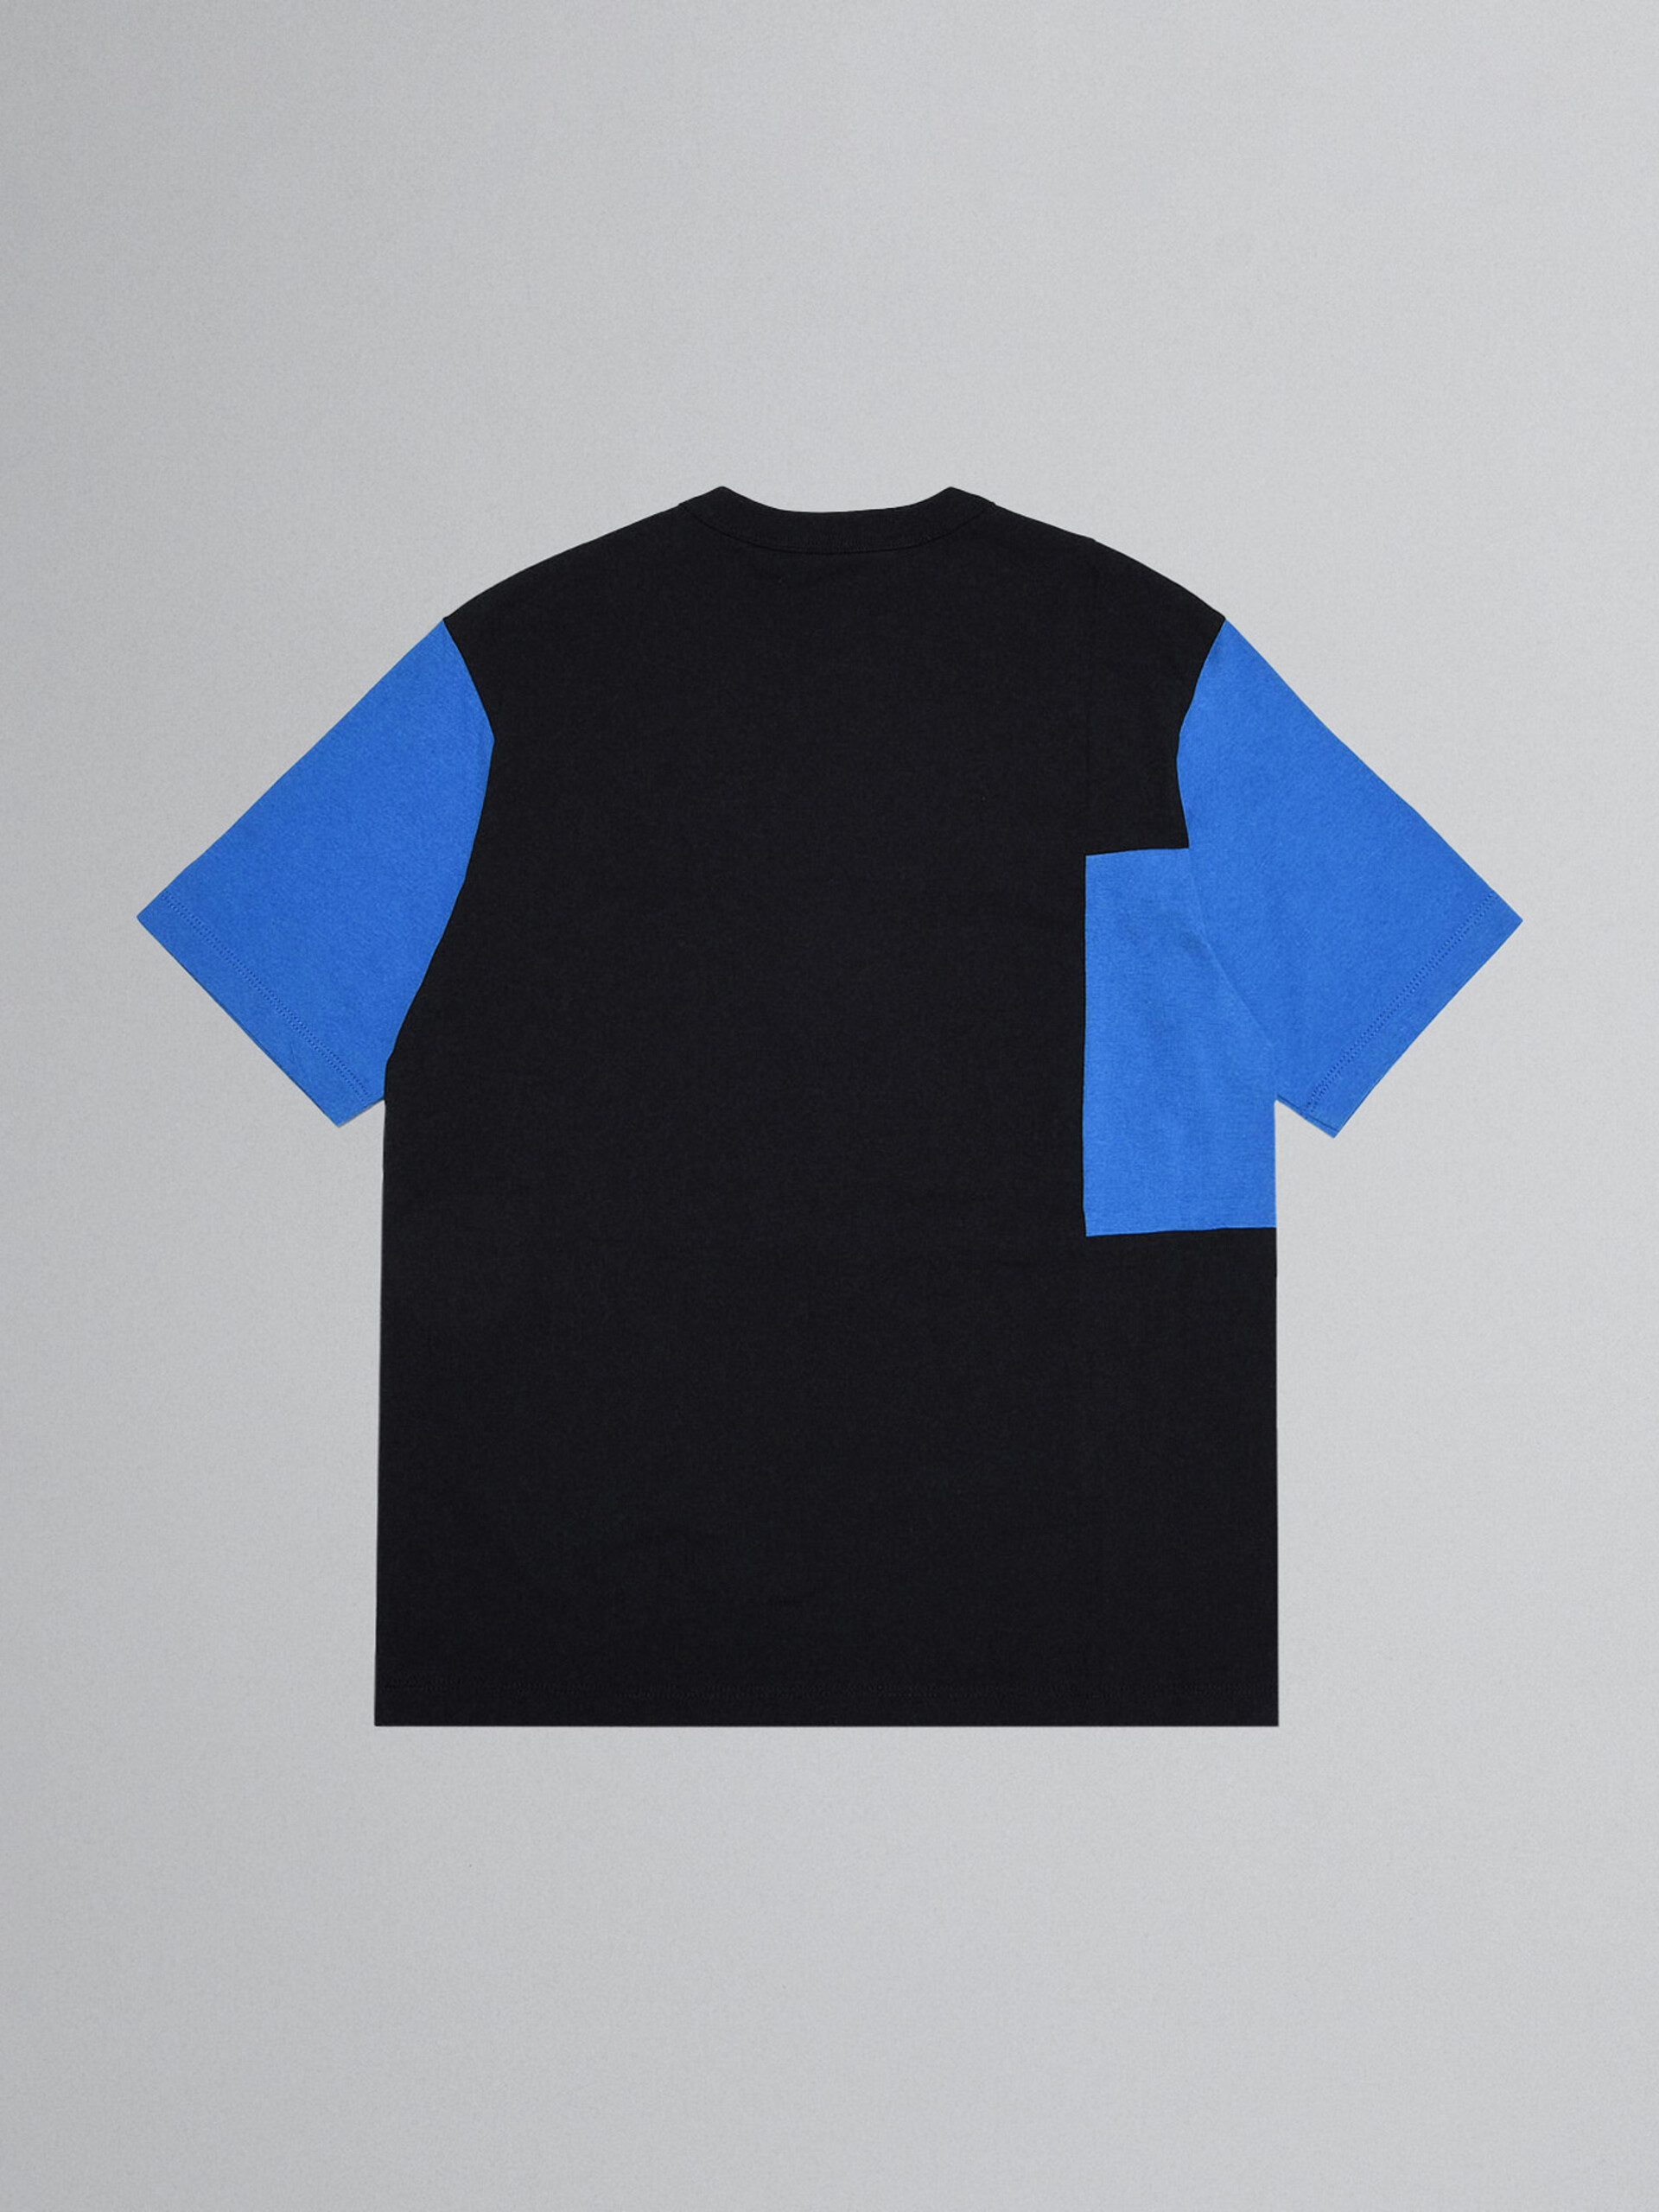 Black college T-shirt with contrast panels - T-shirts - Image 2